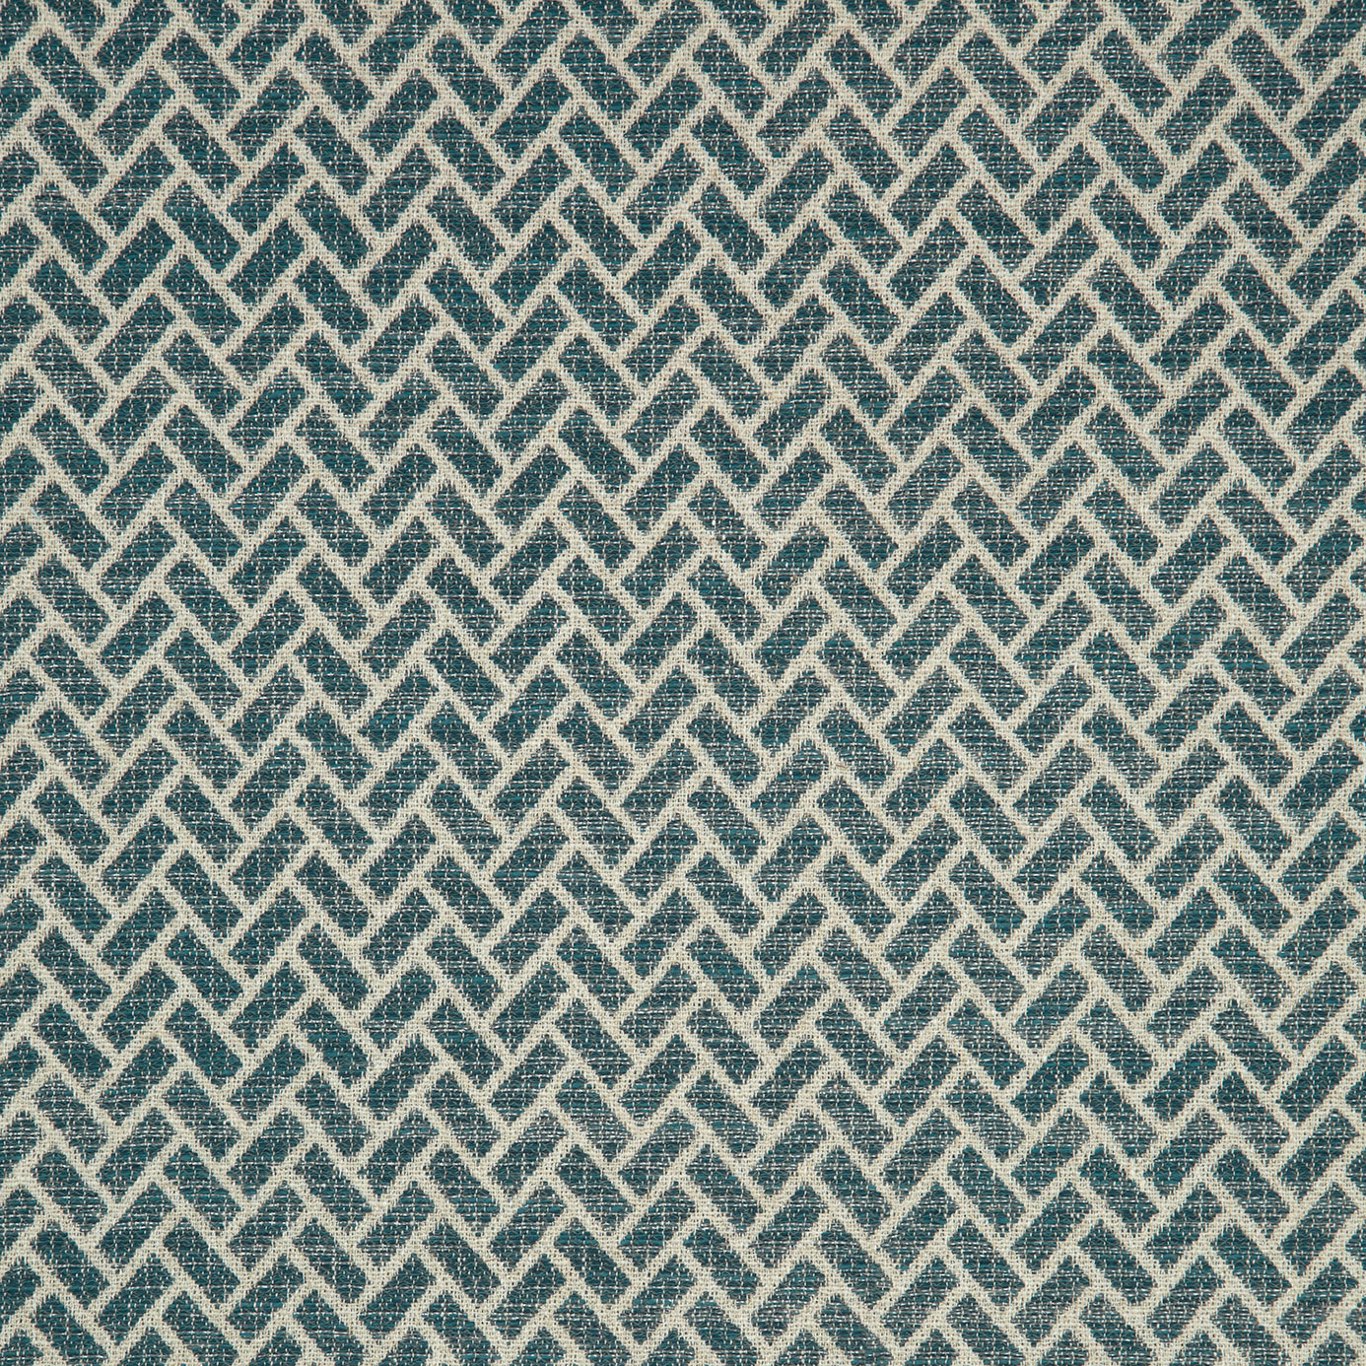 Cipriani Teal Fabric by STG